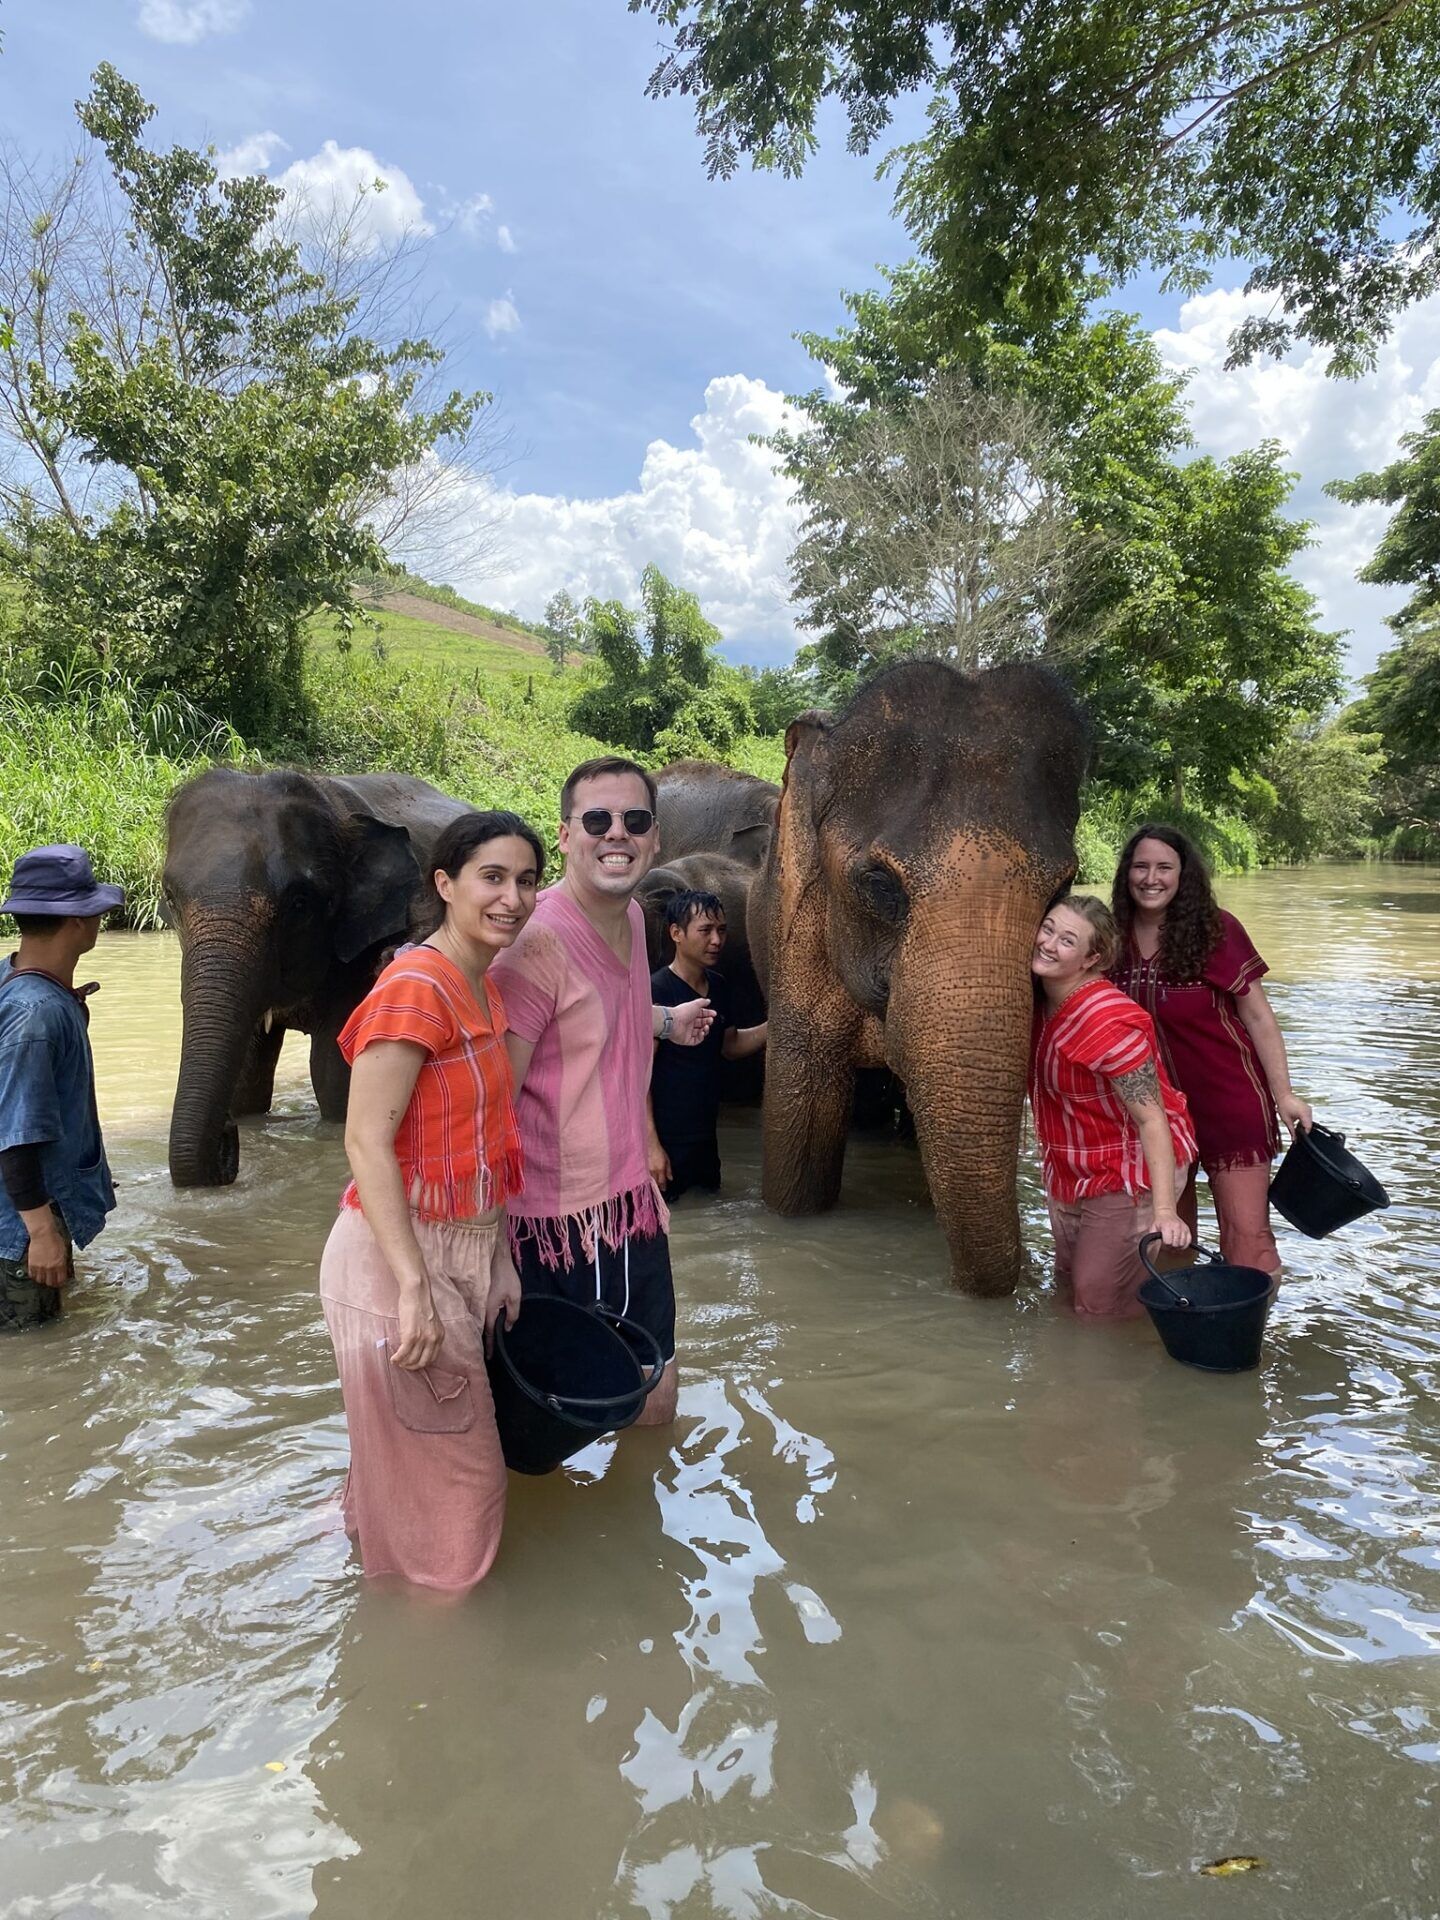 A group of people standing in water with elephants at the Elephant Freedom Project.